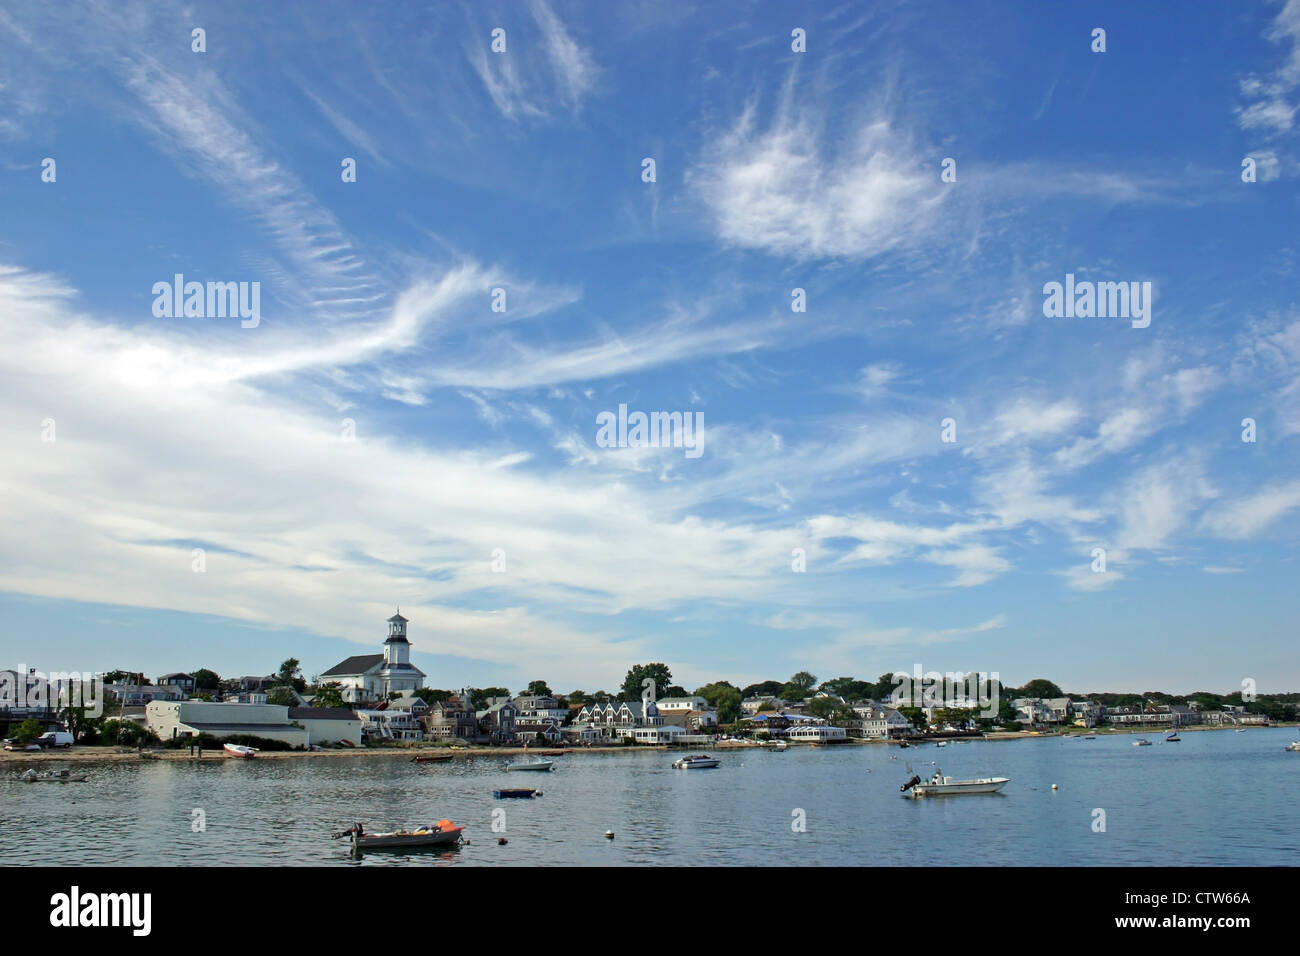 A view of Provincetown, Massachusetts from the harbor Stock Photo